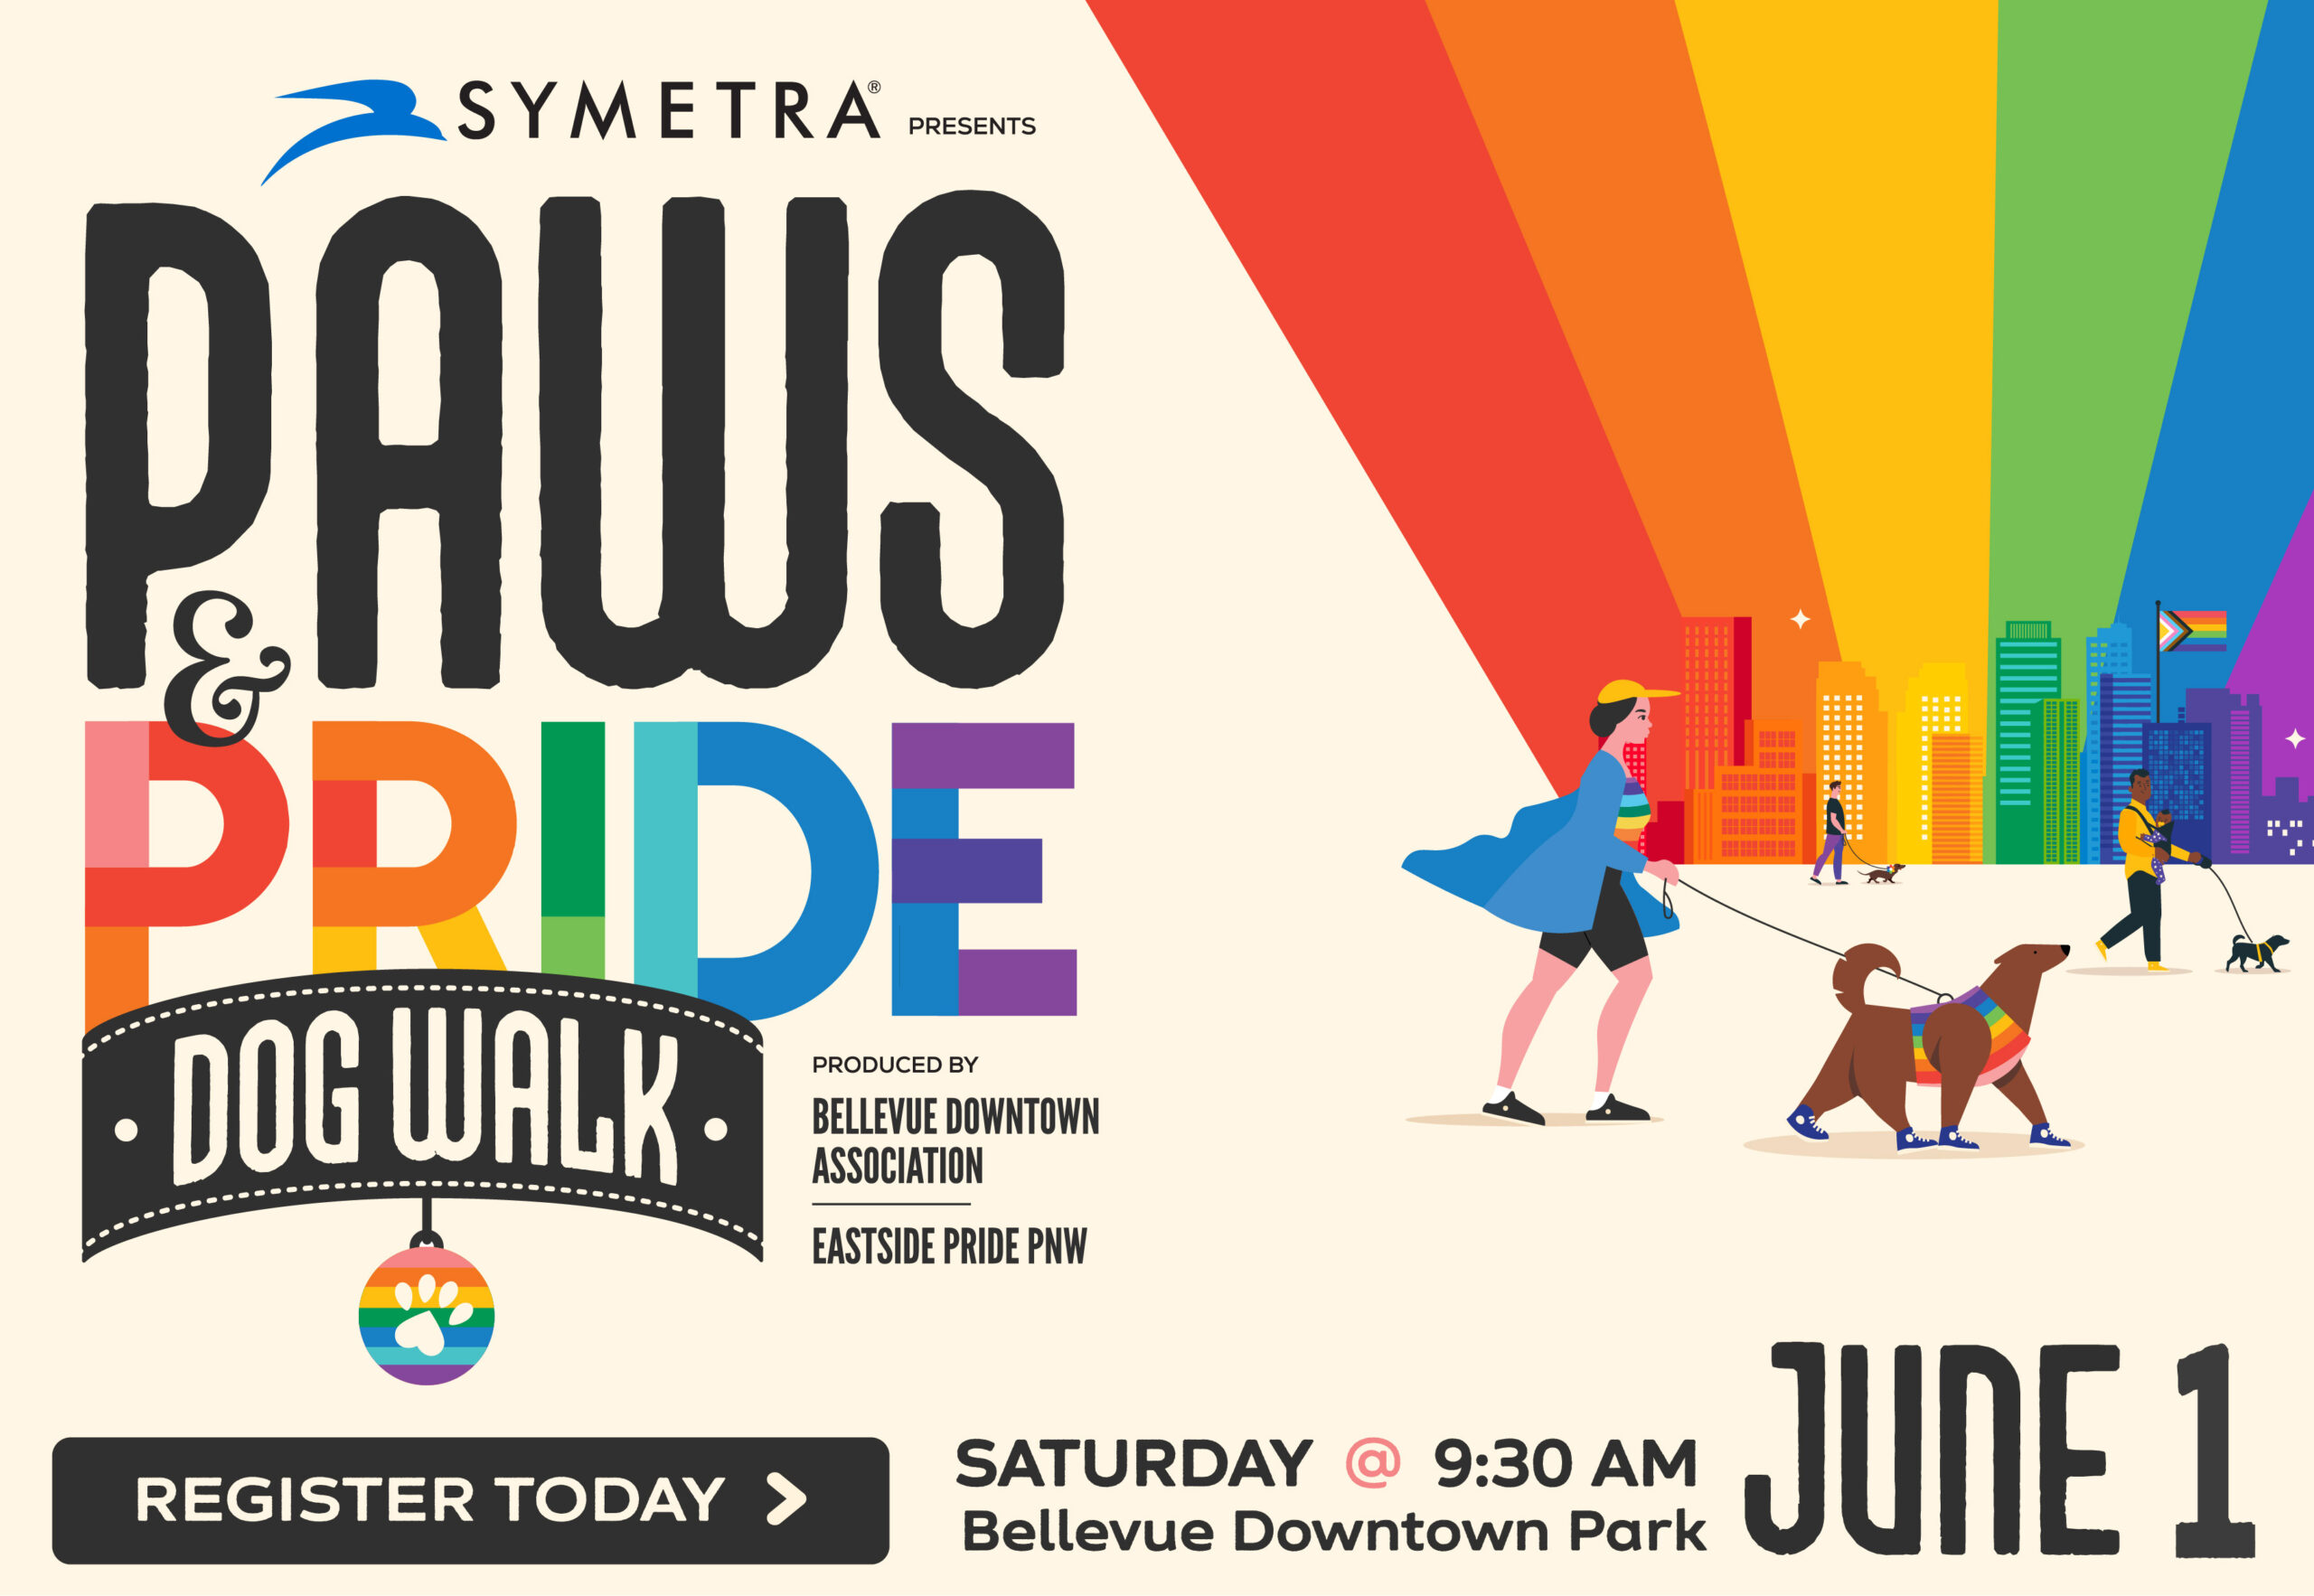 A city skyline with a rainbow along with various cartoon people walking dogs with rainbows. The words "Paws & Pride: Dogwalk, Produced by Bellevue Downtown Association, Eastside Pride PNW, register today! Saturday June 1st @ 9:30, Bellevue Downtown Park"